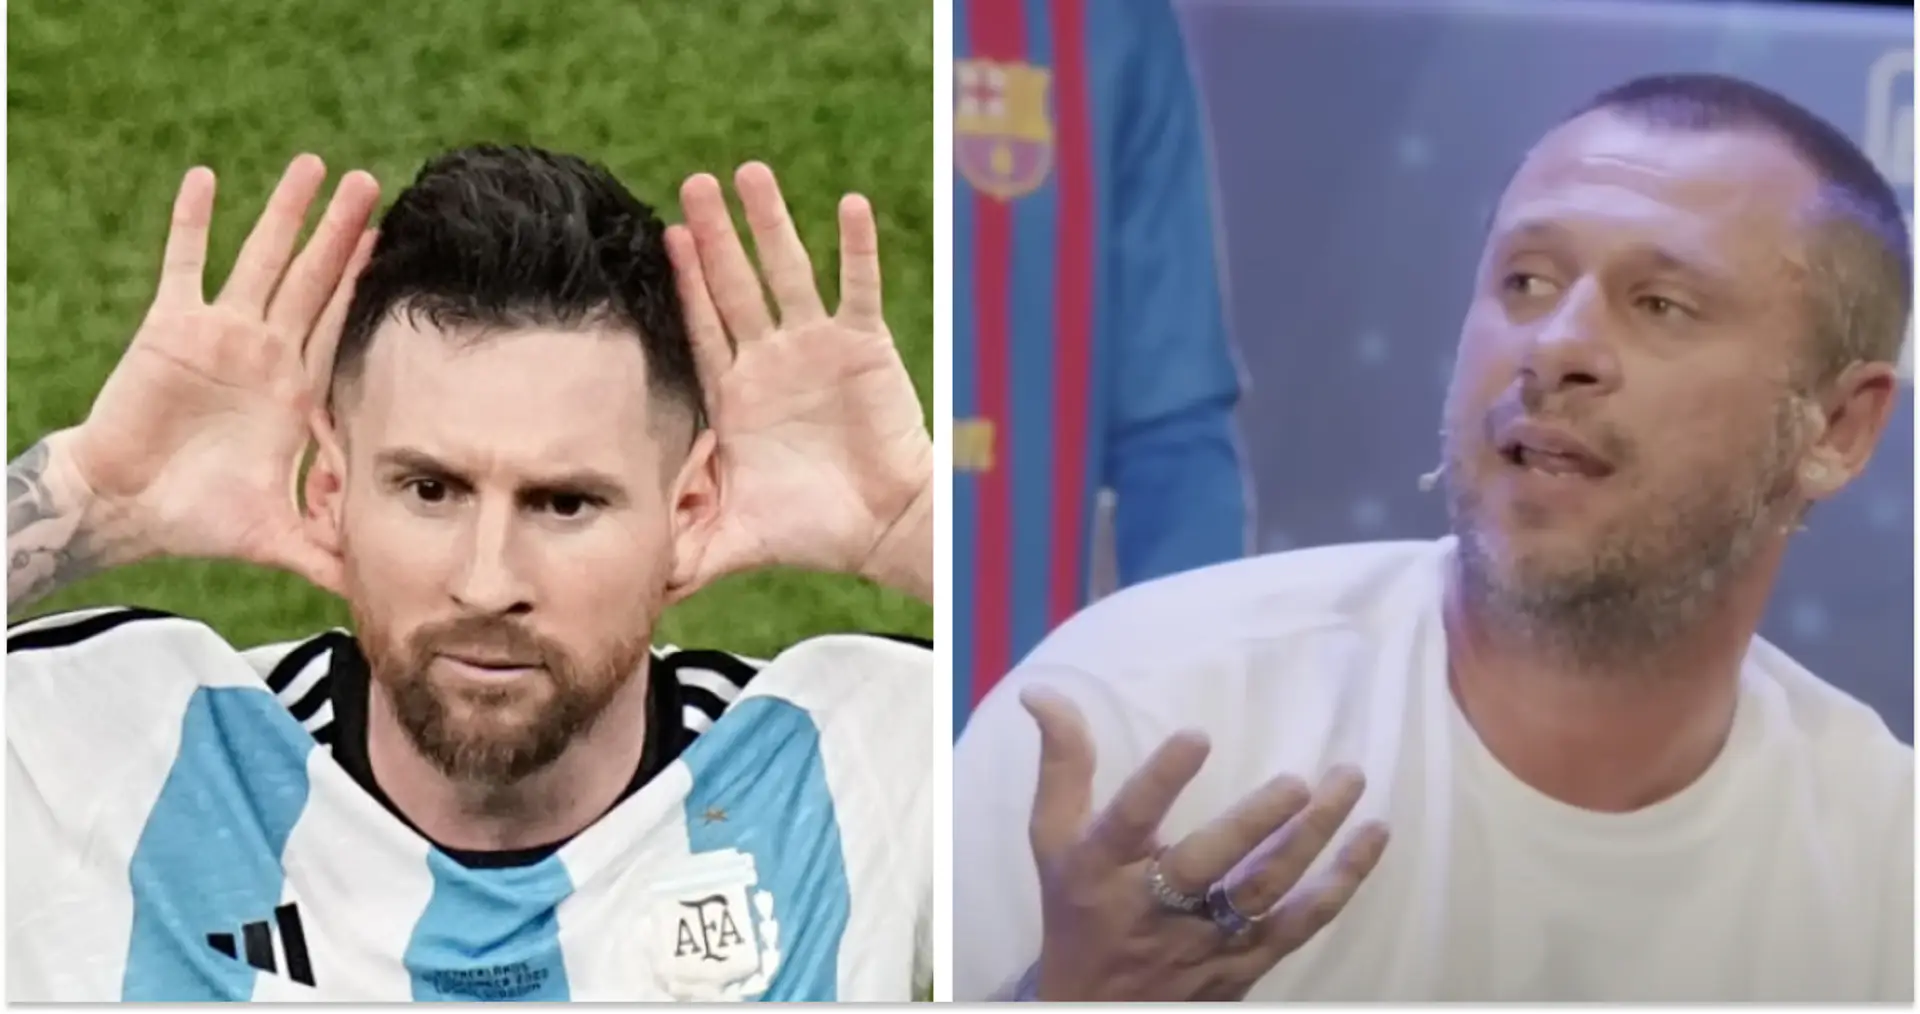 'The best thing you'll hear today': Antonio Cassano singing odes to Leo Messi after World Cup triumph